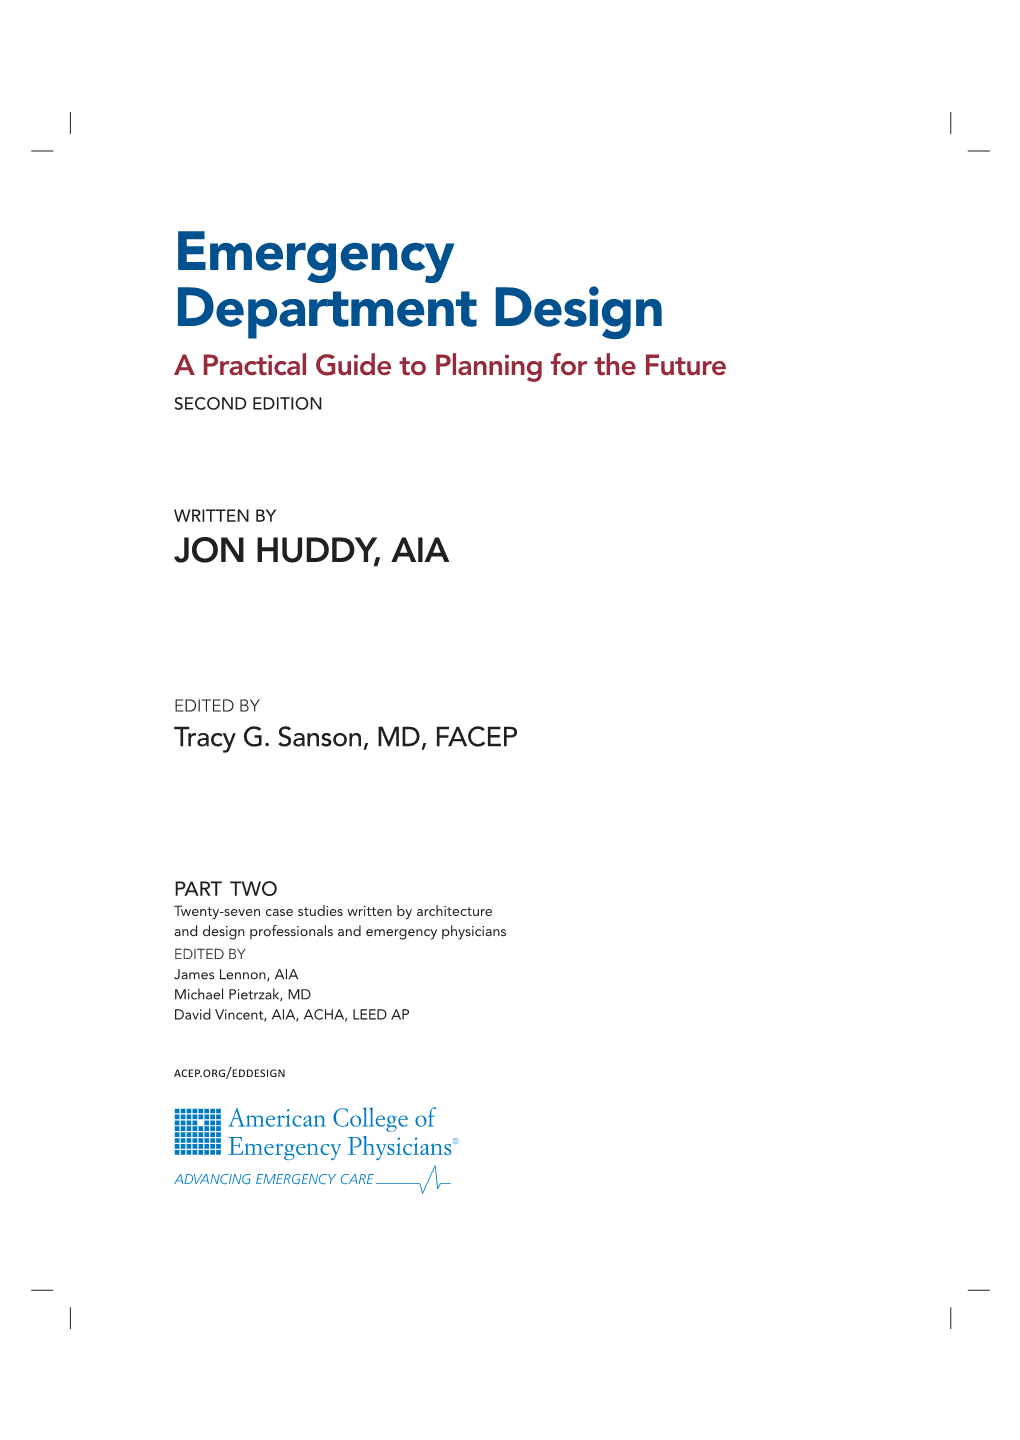 Emergency Department Design a Practical Guide to Planning for the Future SECOND EDITION